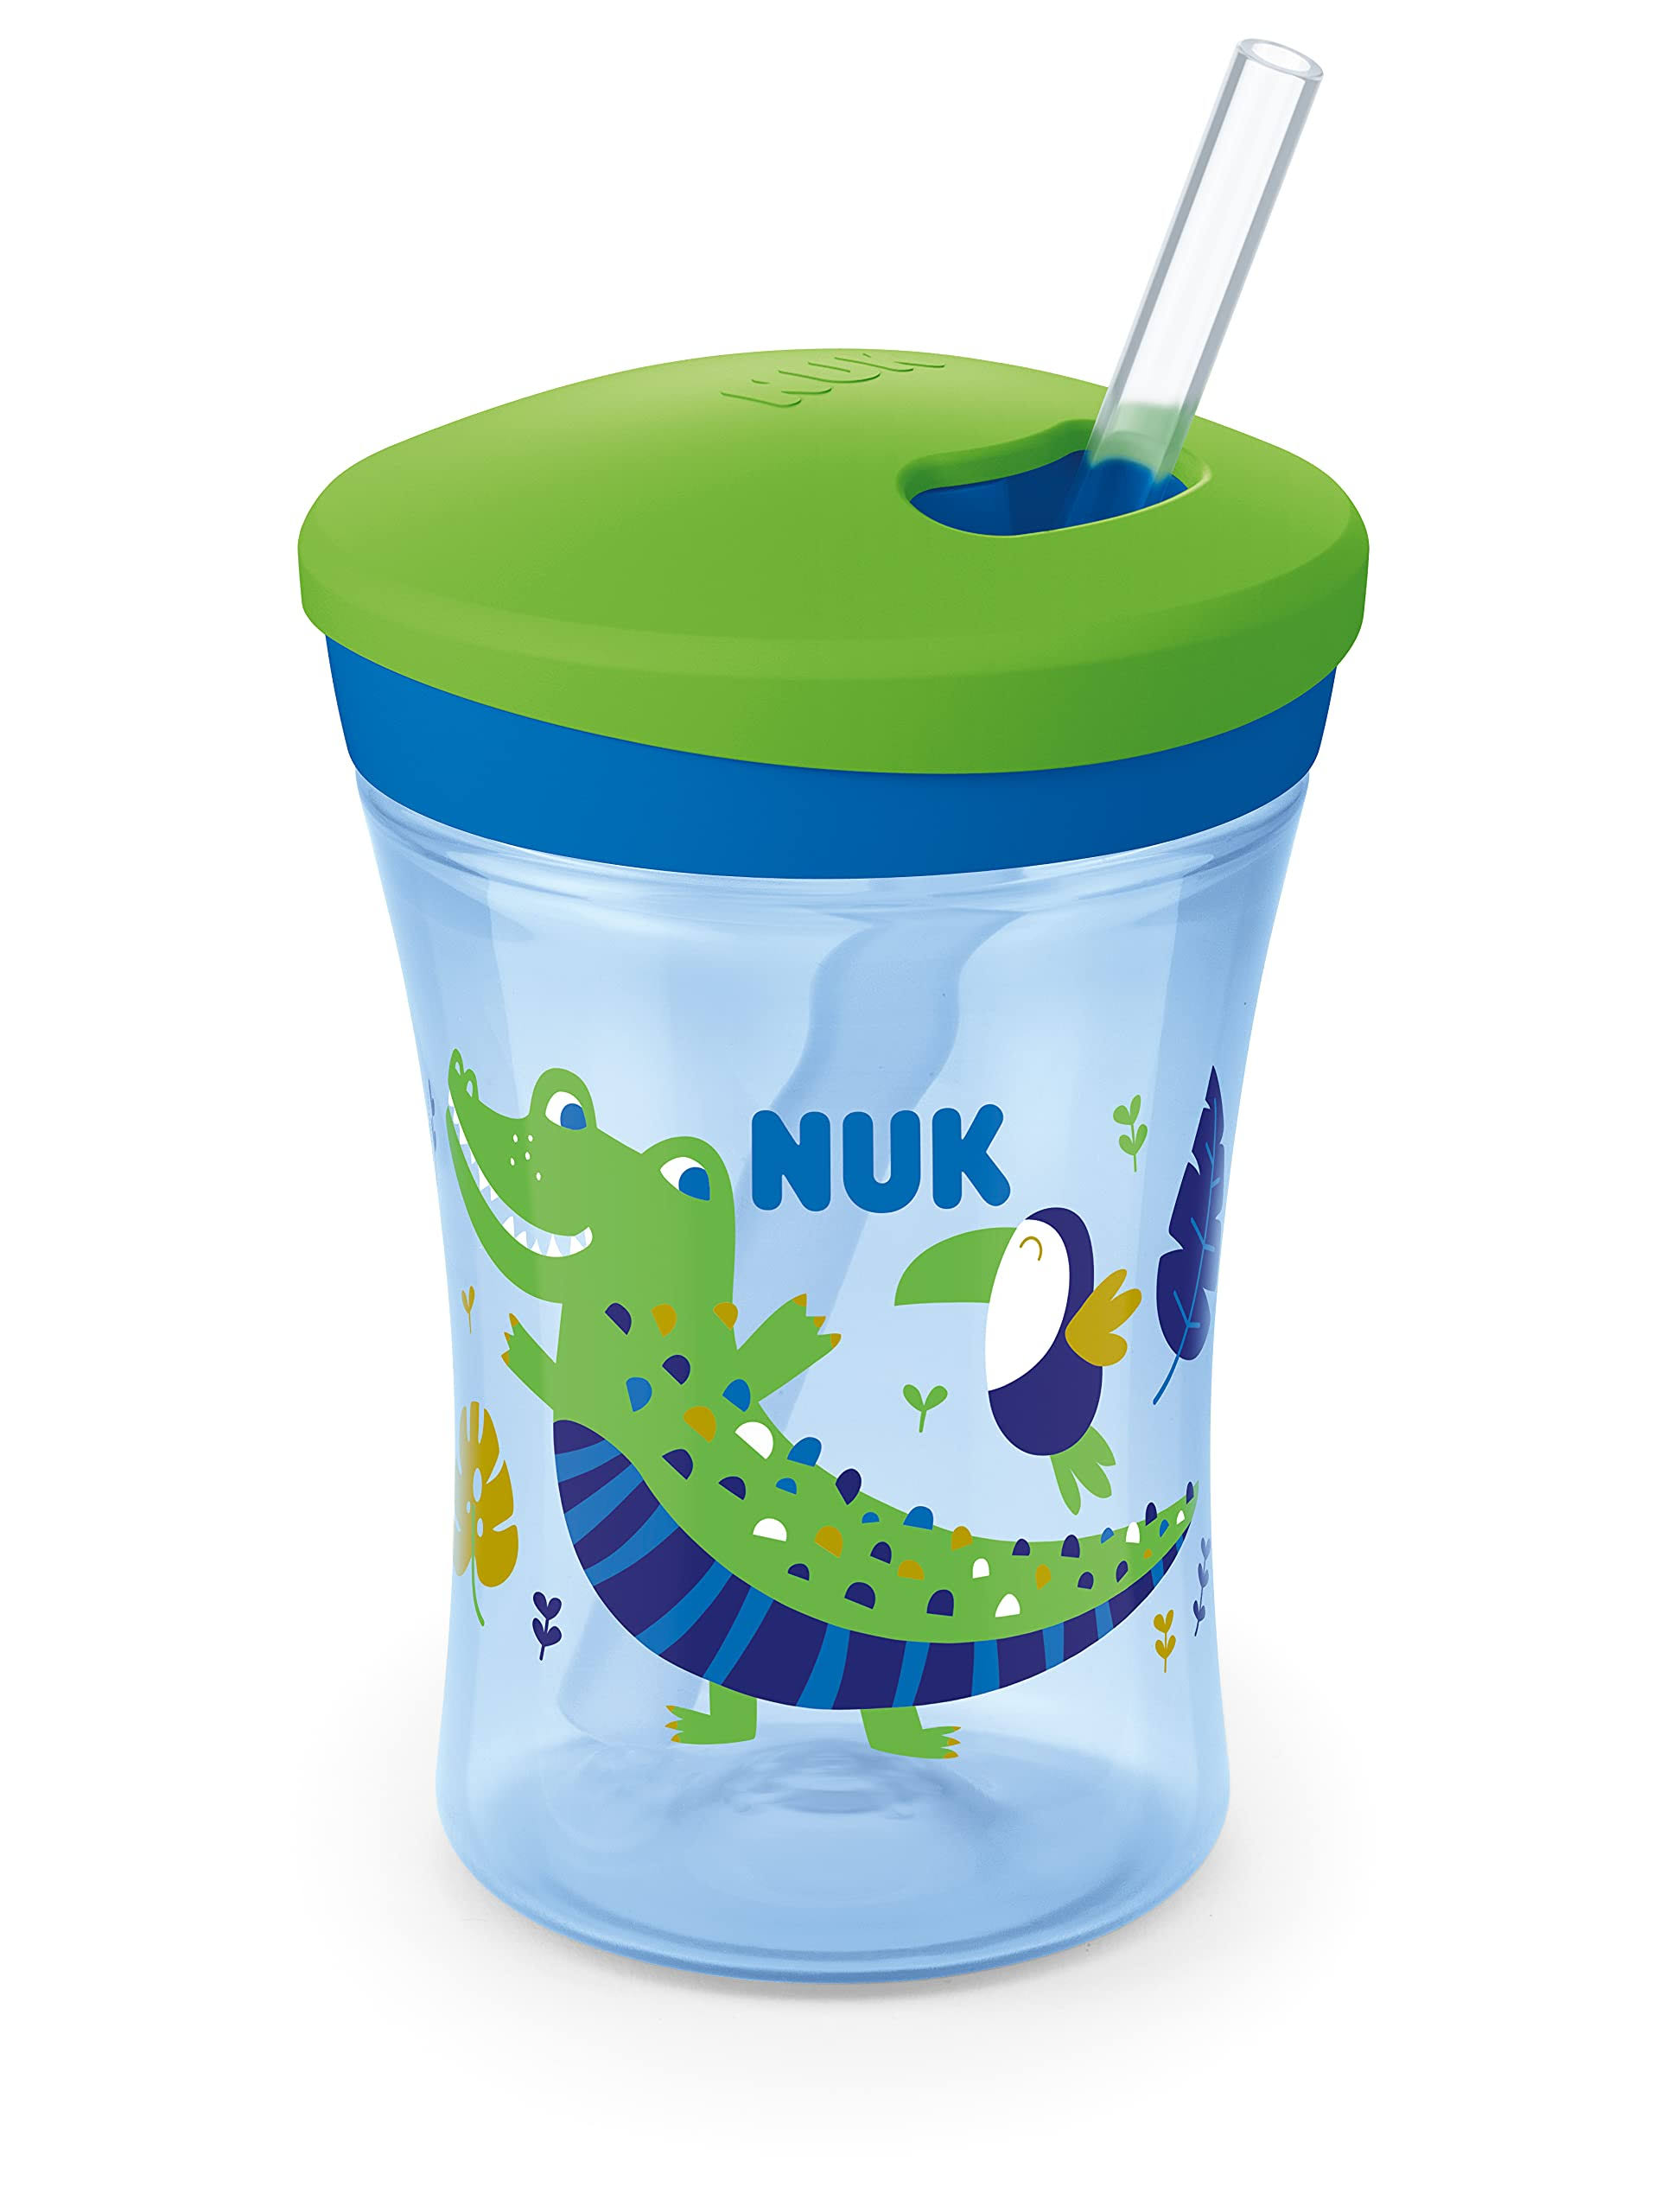 NUK Action Cup Toddler Cup with Chameleon Effect, 12+ Months, Colour Changing, Twist Close Soft Drinking Straw, Leak-proof, BPA-Free, Crocodile, Gree